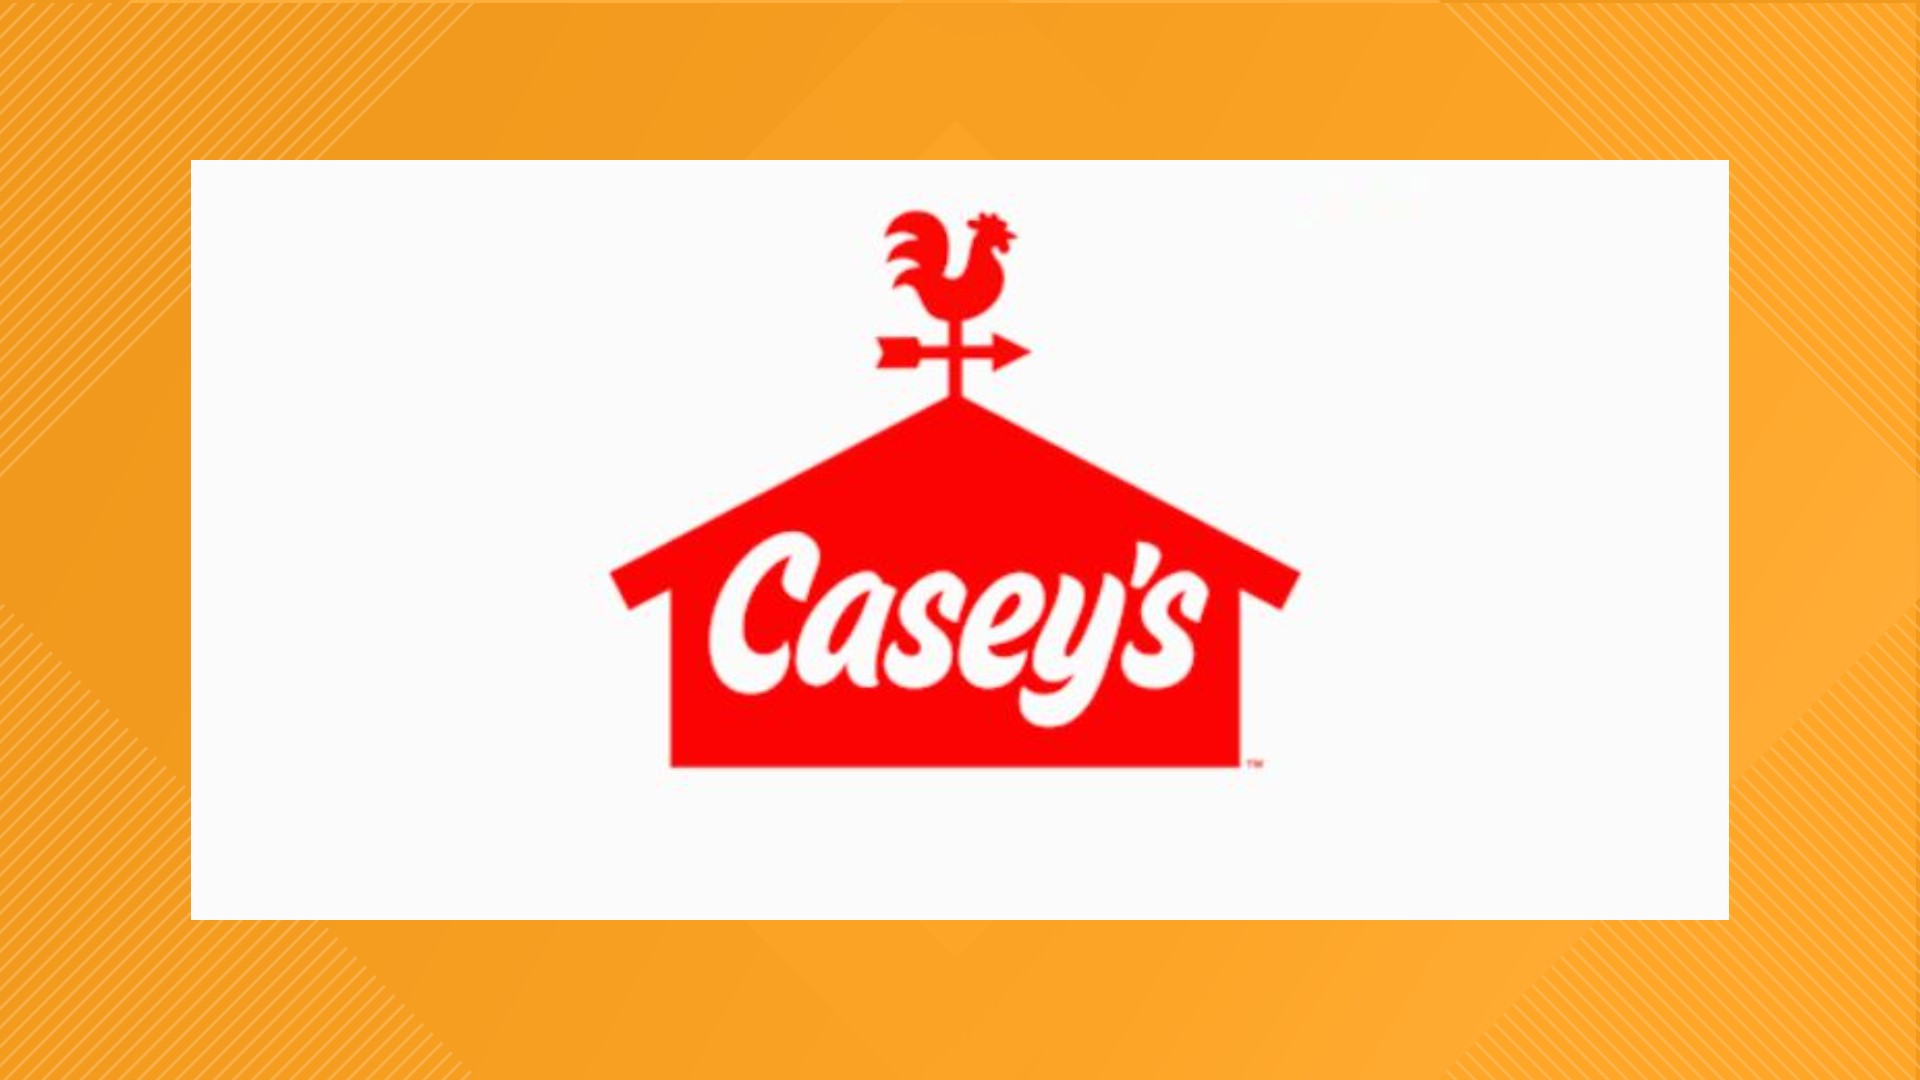 From giving some change at the counter to donating via the Casey's mobile app, here's how you can get involved.